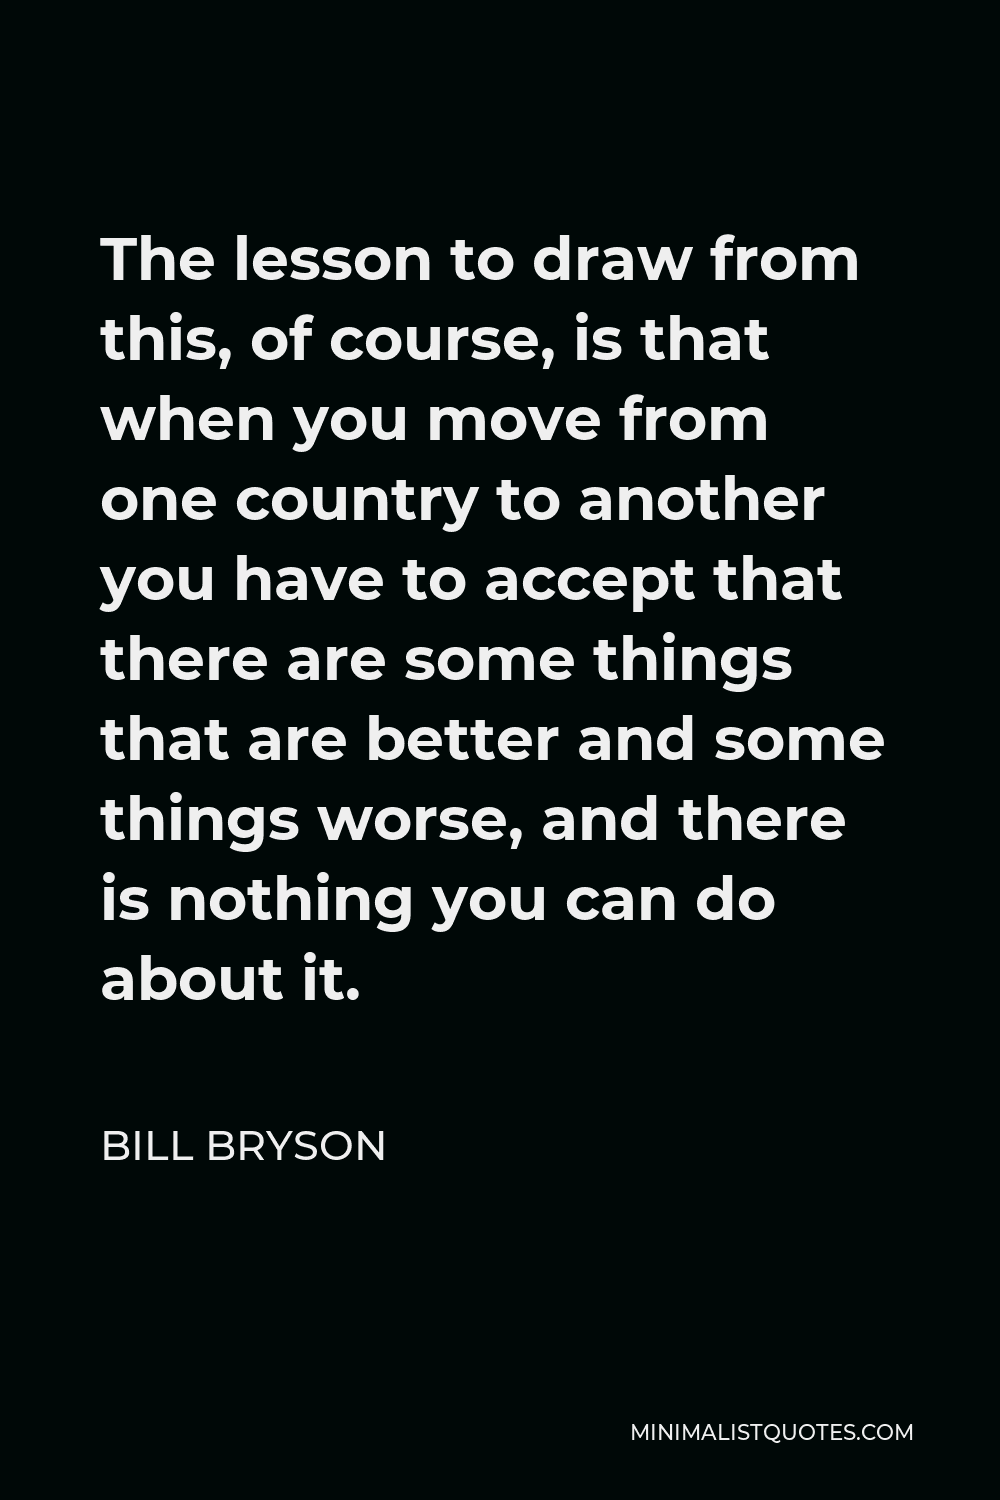 Bill Bryson Quote - The lesson to draw from this, of course, is that when you move from one country to another you have to accept that there are some things that are better and some things worse, and there is nothing you can do about it.